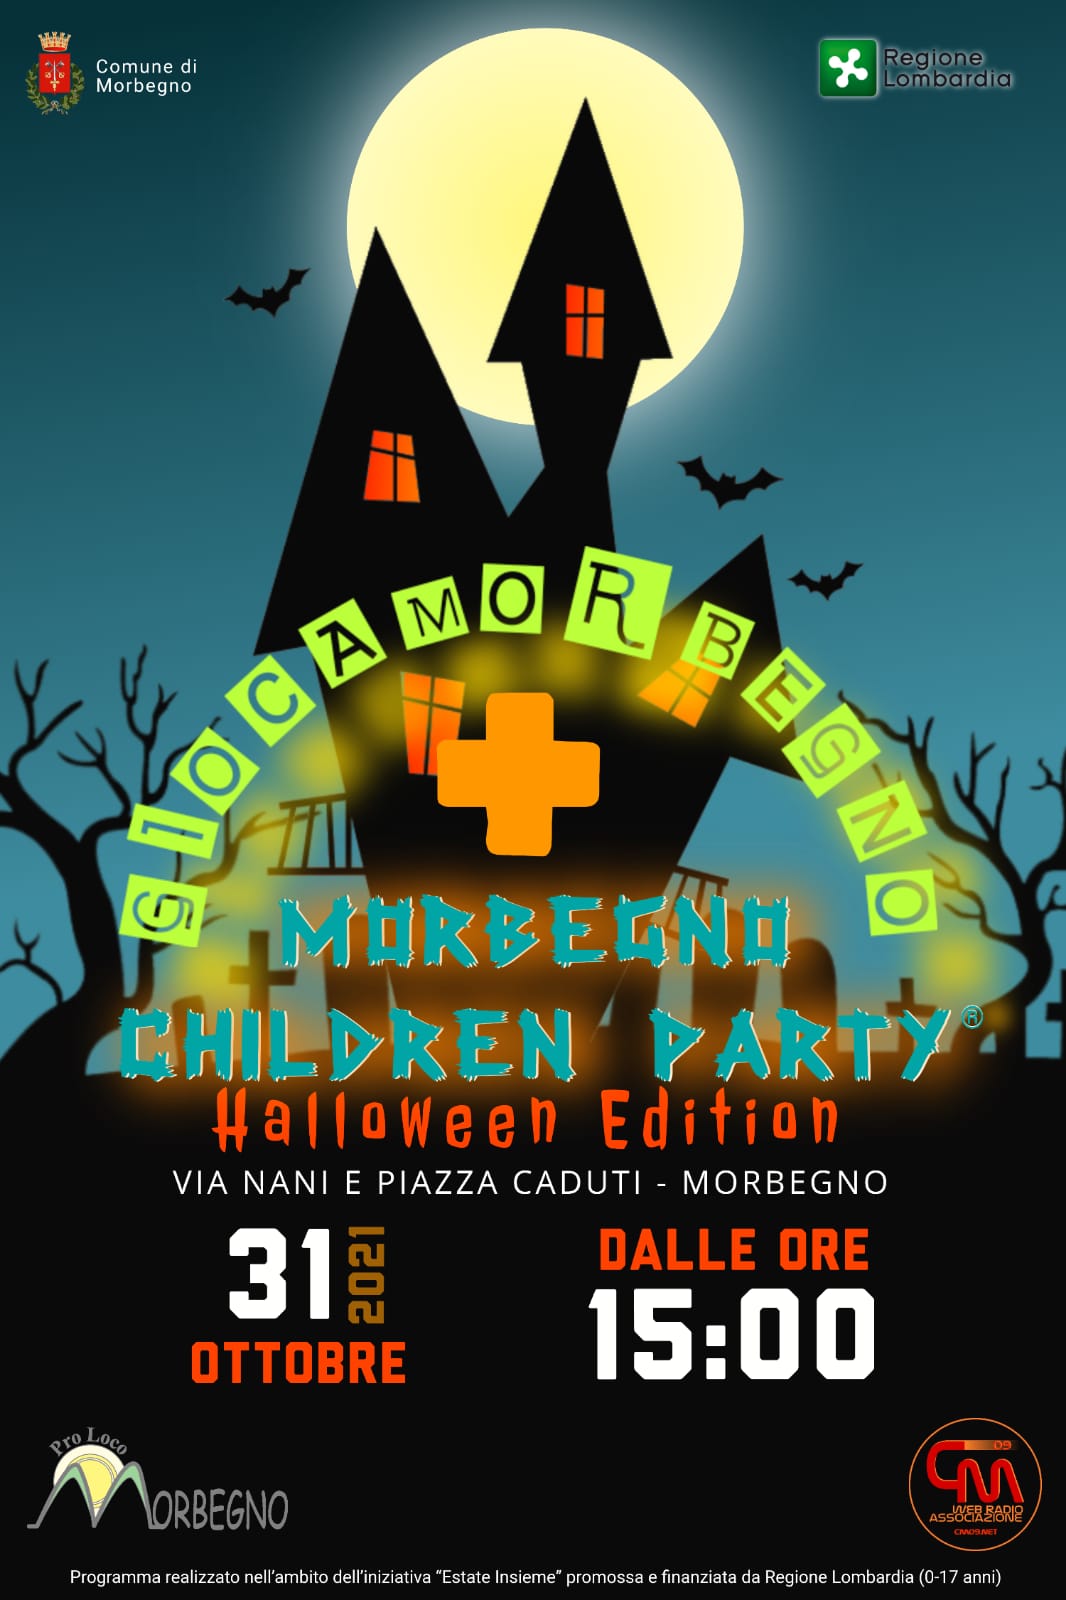 GiocaMorbegno + Halloween Children Party